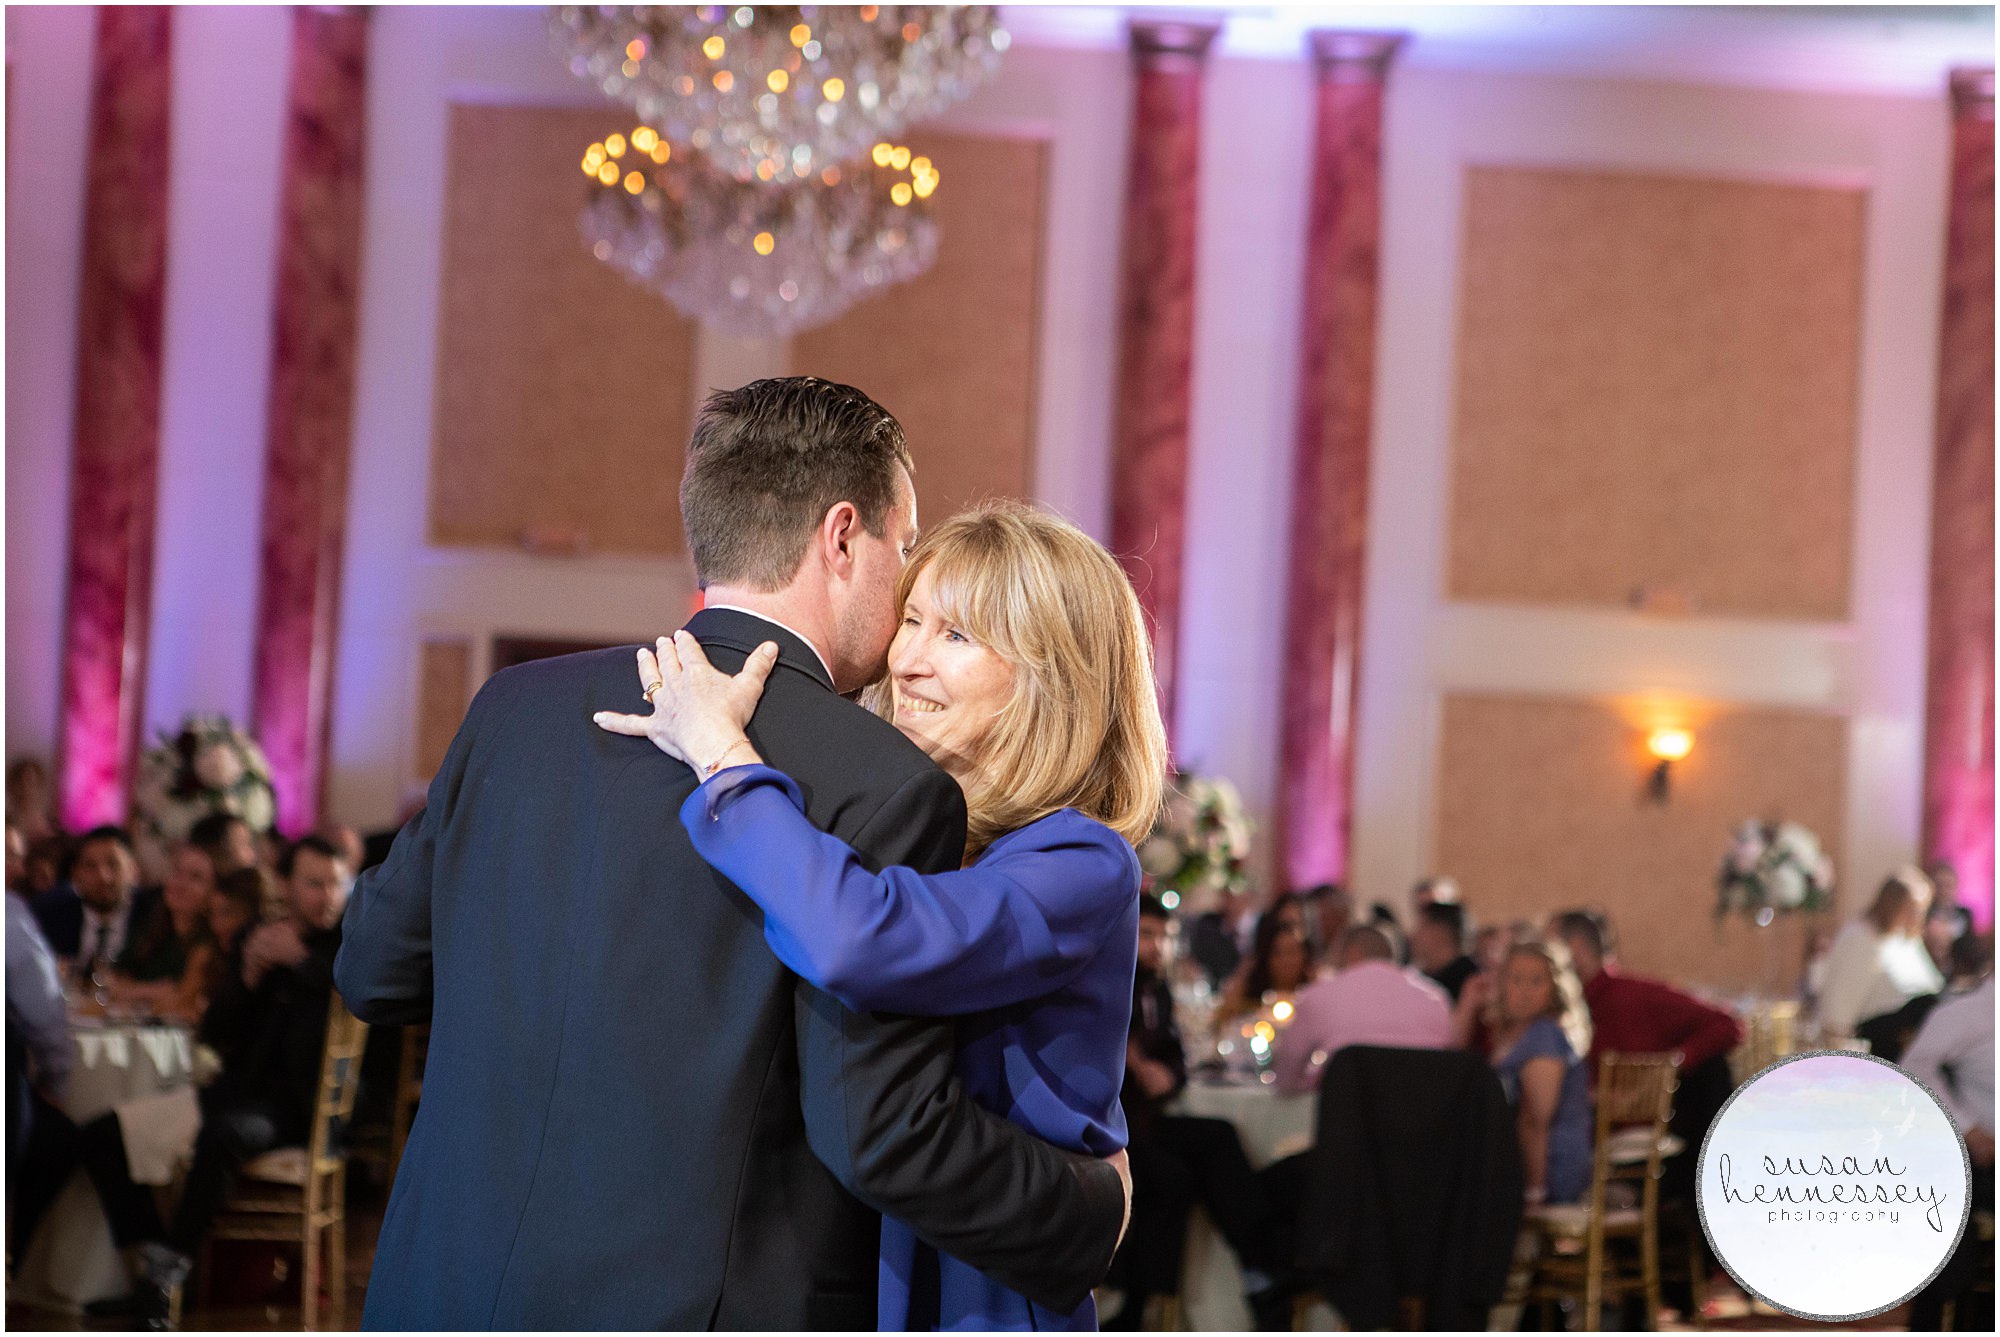 The groom dances with his mother at wedding reception